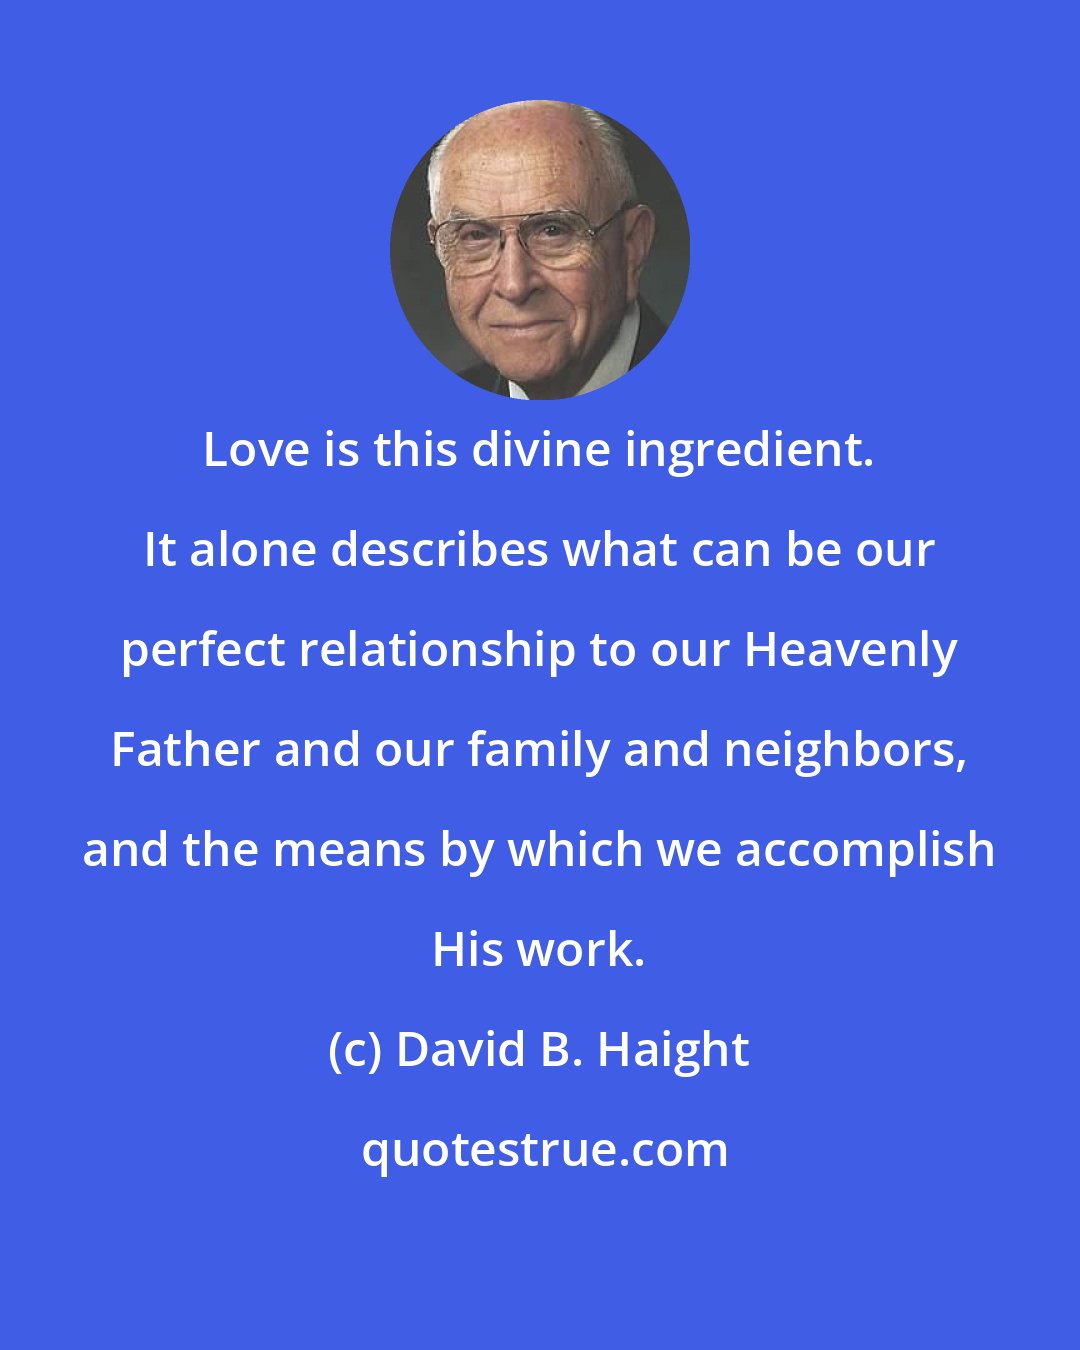 David B. Haight: Love is this divine ingredient. It alone describes what can be our perfect relationship to our Heavenly Father and our family and neighbors, and the means by which we accomplish His work.